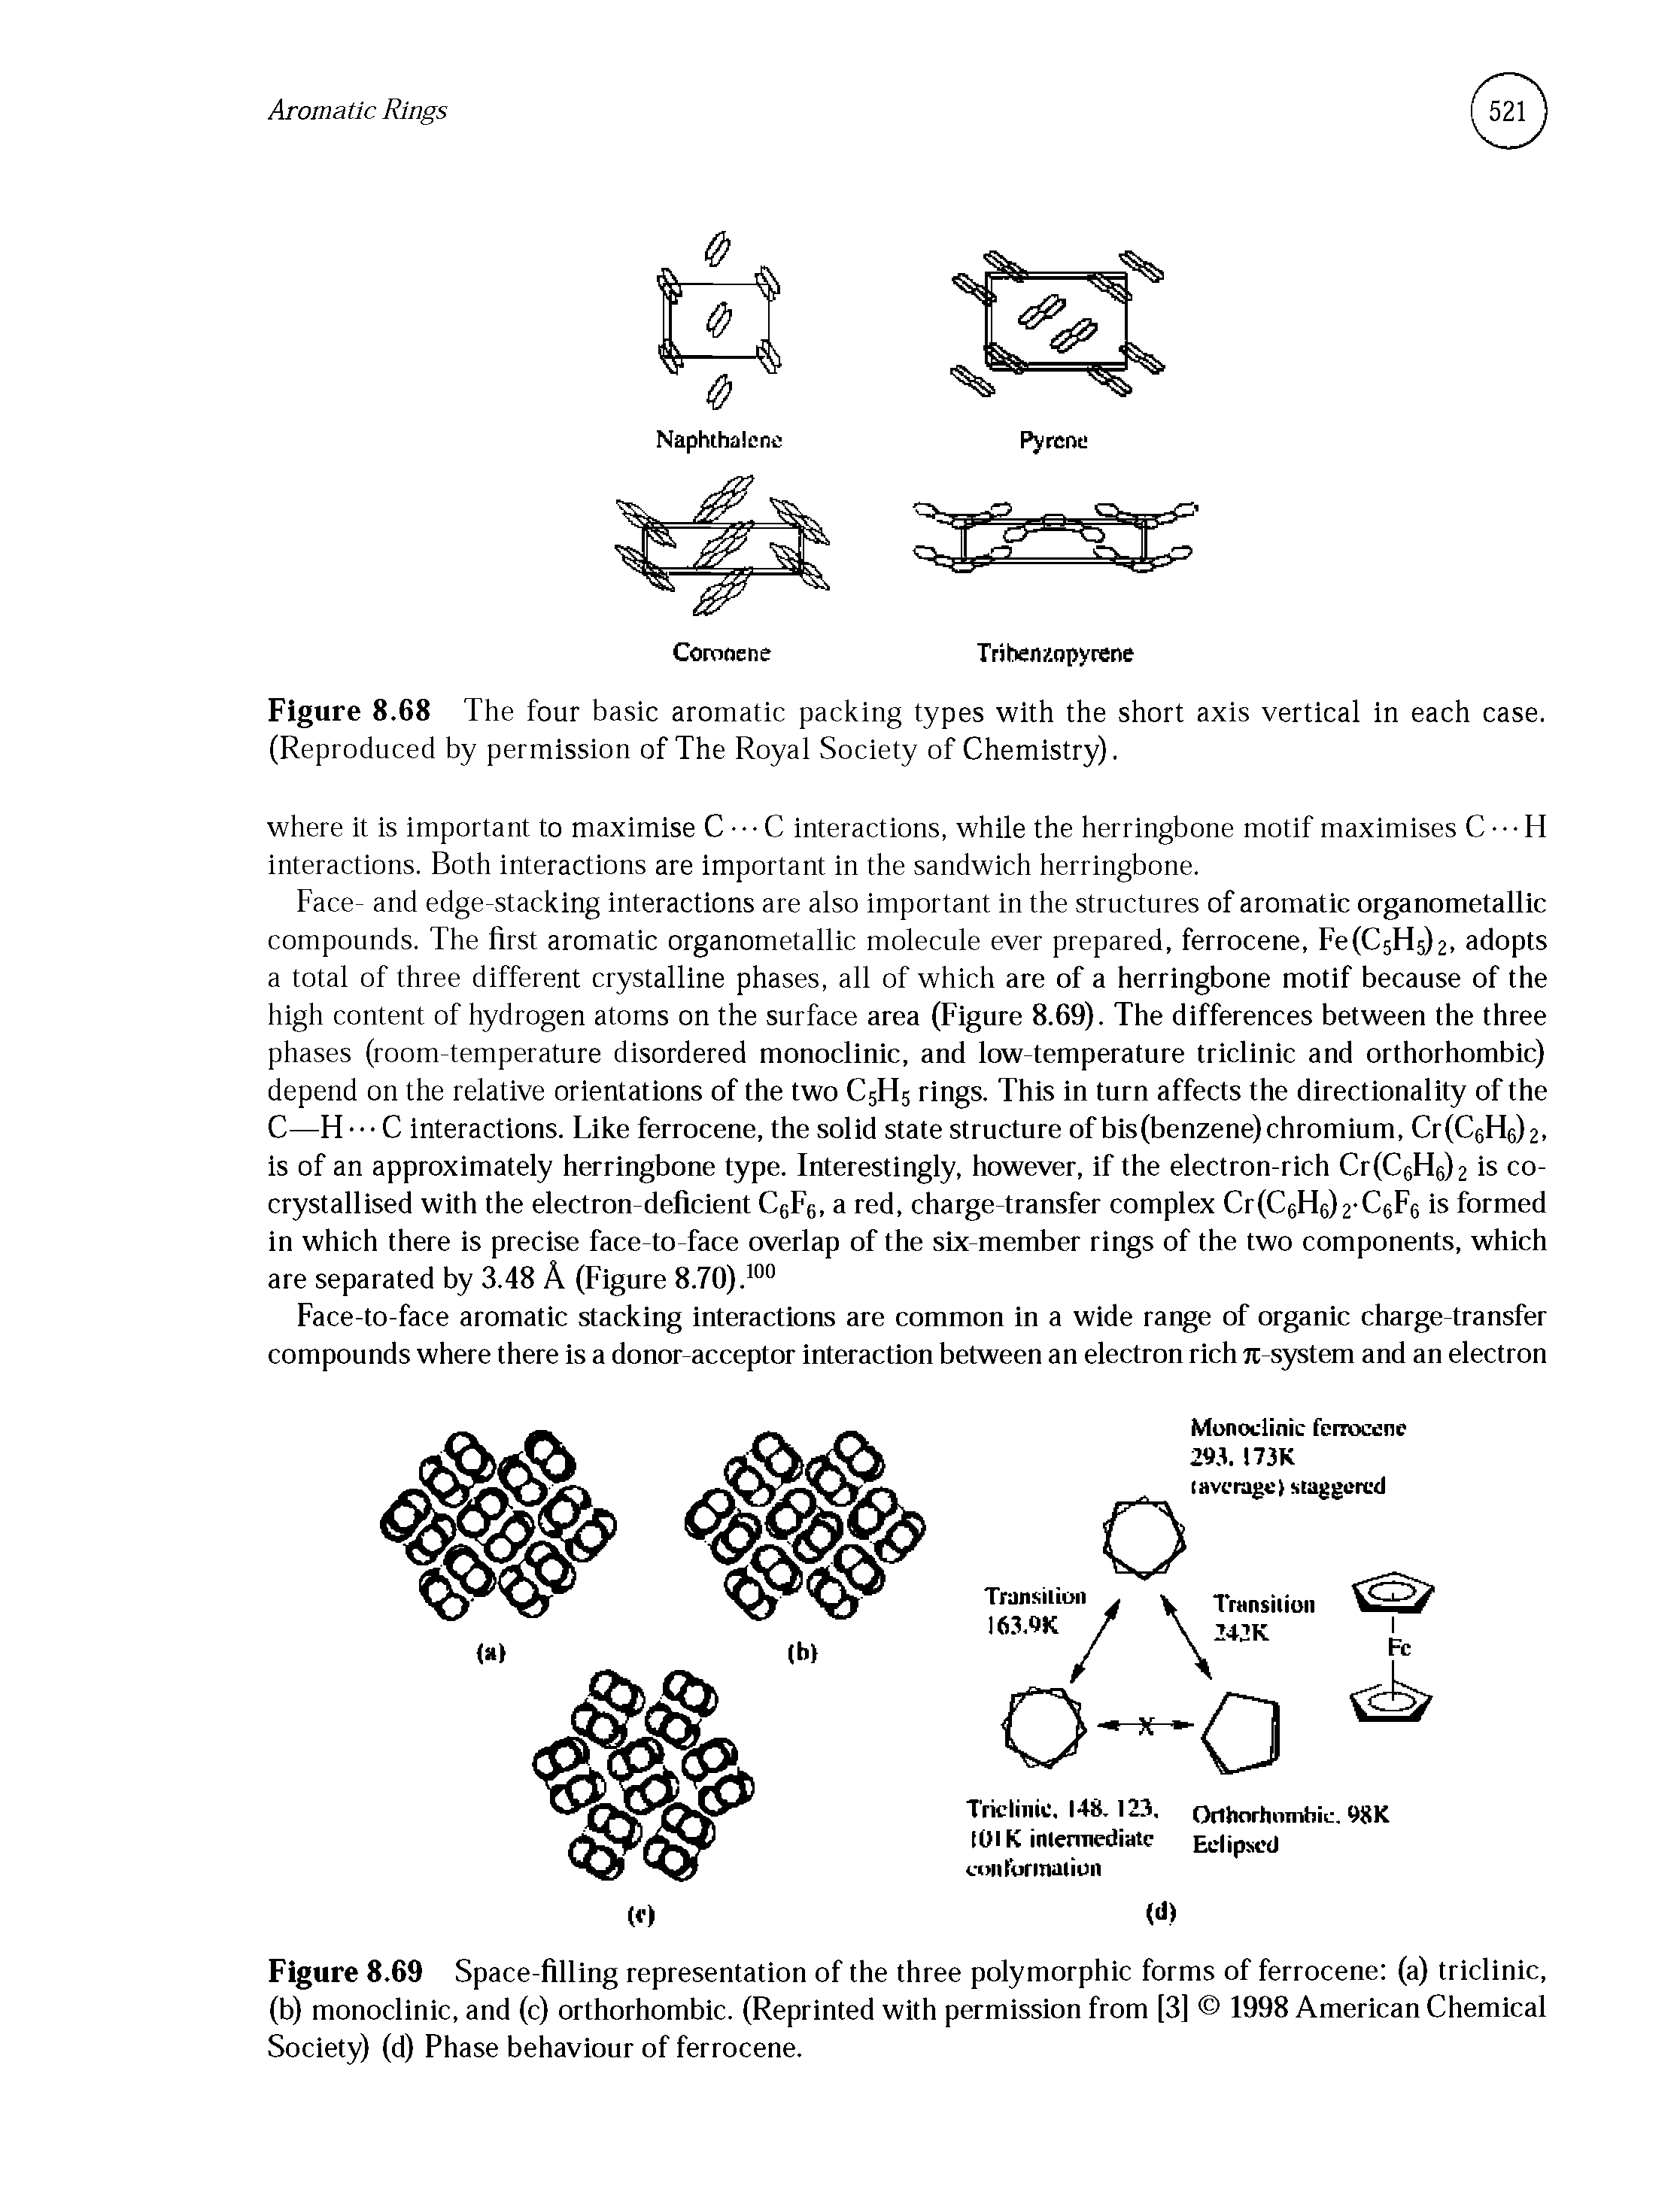 Figure 8.69 Space-filling representation of the three polymorphic forms of ferrocene (a) triclinic, (b) monoclinic, and (c) orthorhombic. (Reprinted with permission from [3] 1998 American Chemical Society) (d) Phase behaviour of ferrocene.